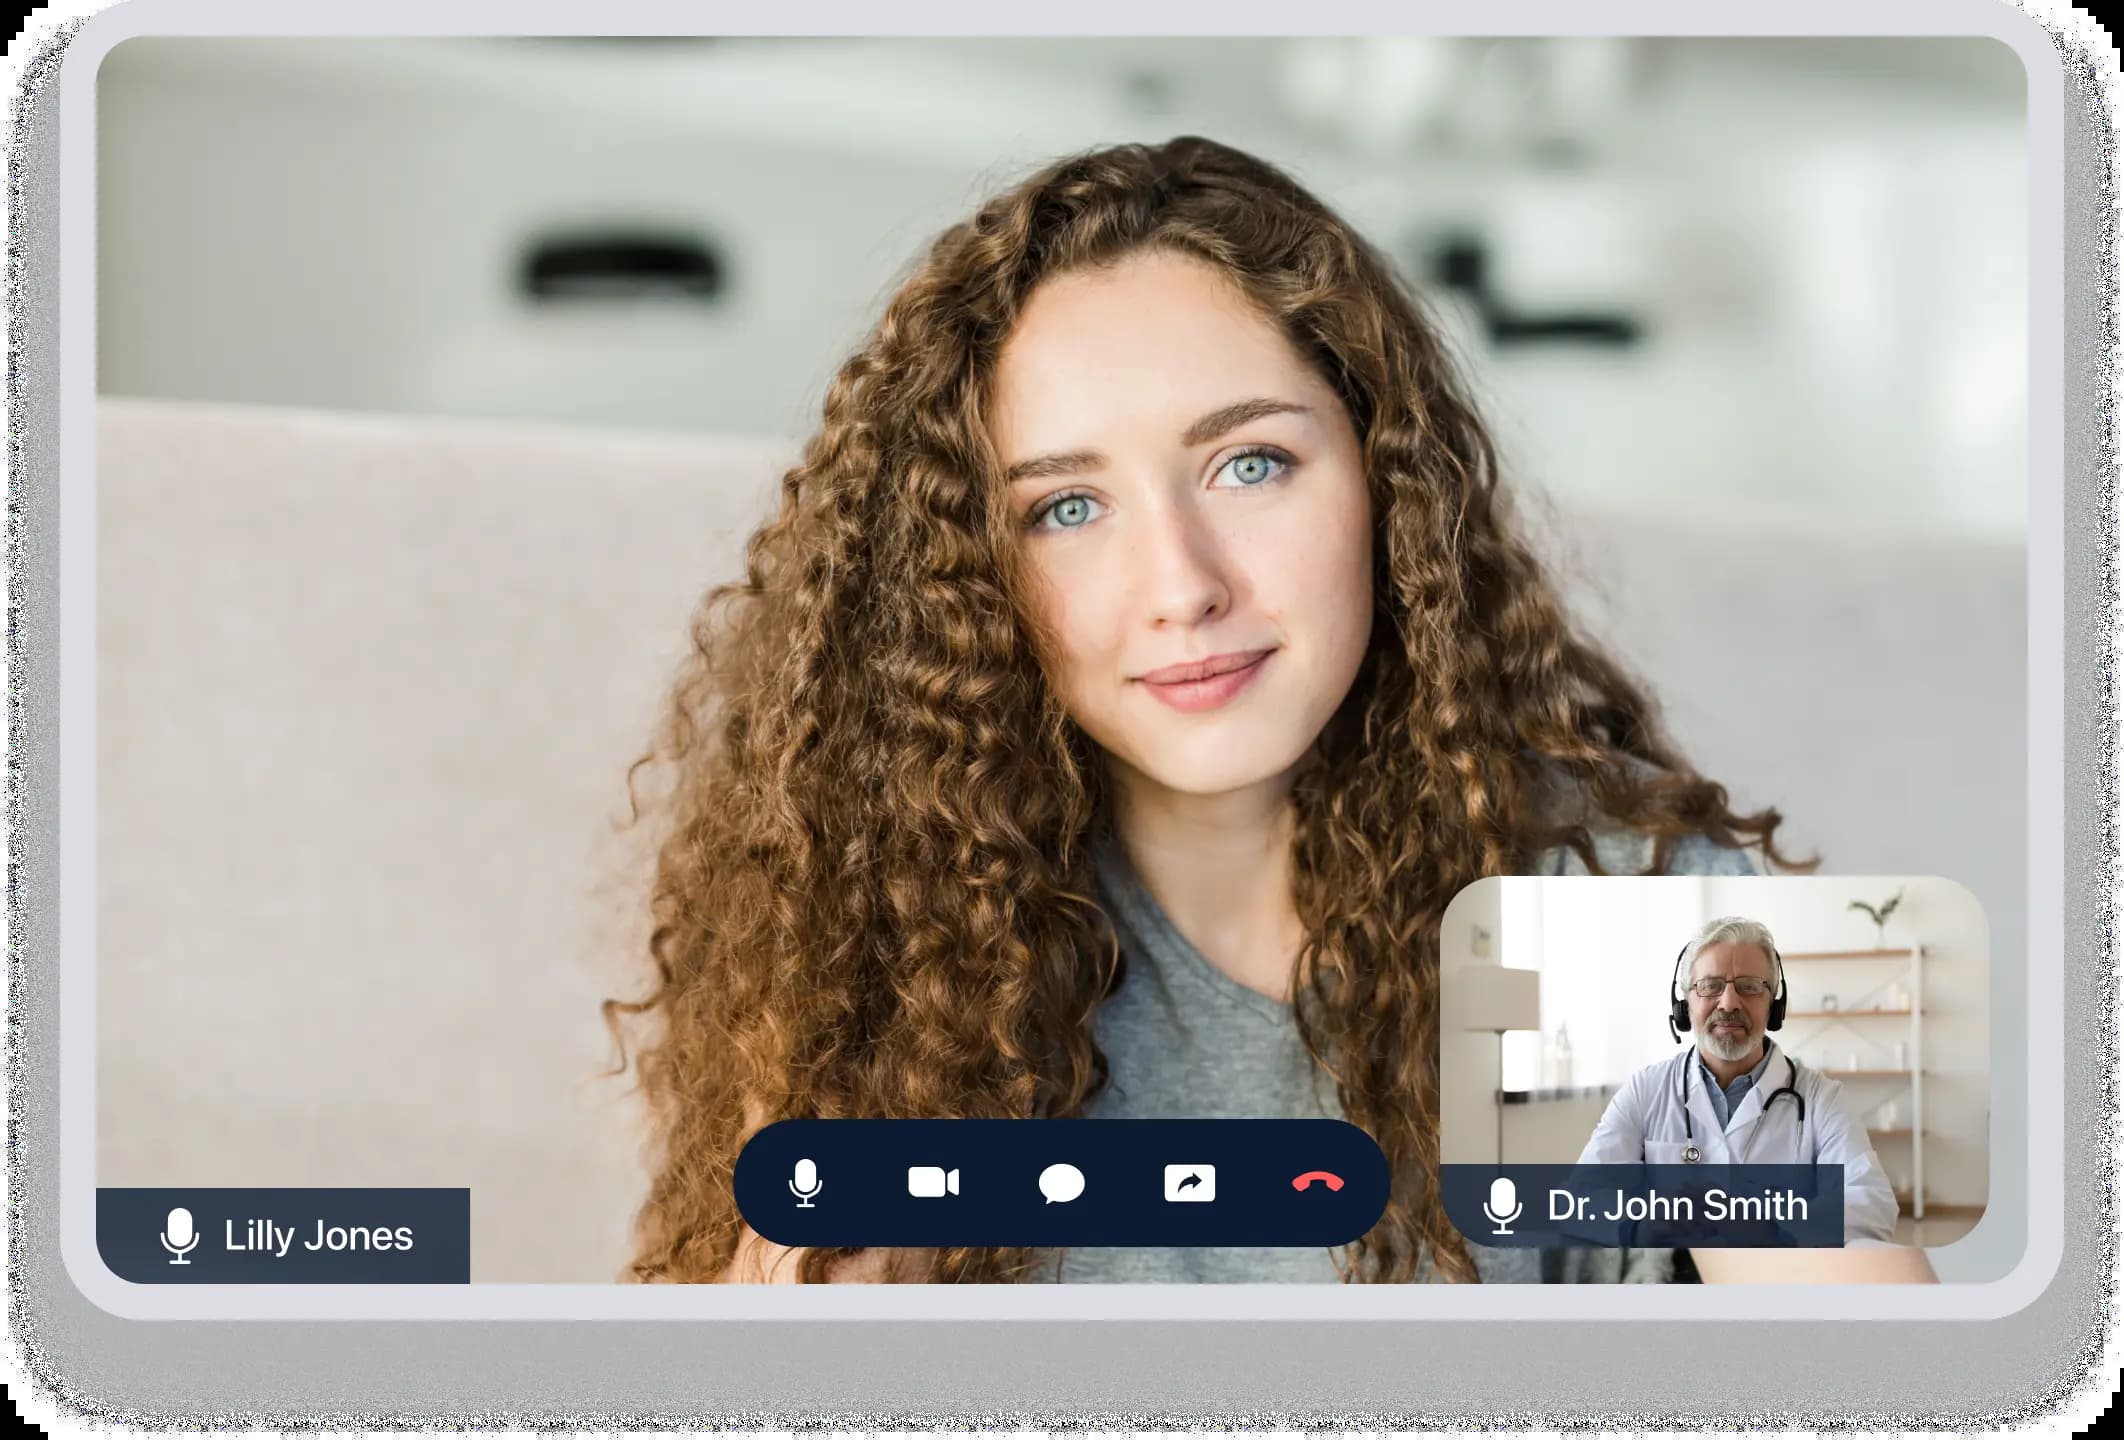 A woman and a man engaged in a video call, utilizing the secure MedMeet feature.